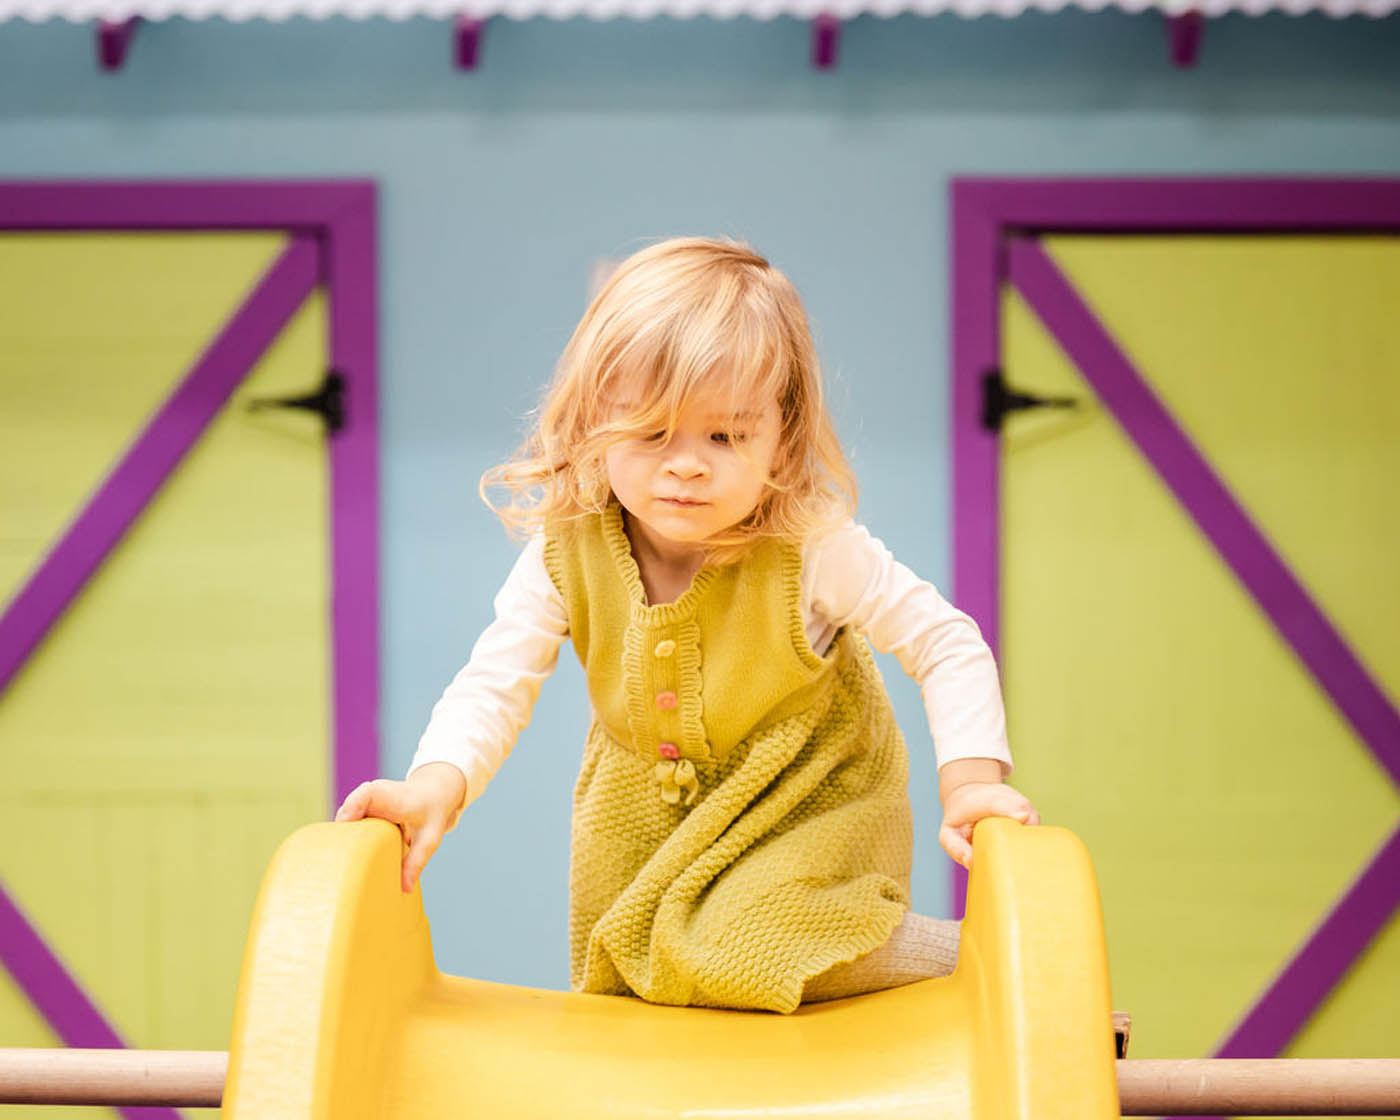 A toddler playing on a yellow slide at Romp n' Roll Katy's classes for 3 year olds in Katy, TX